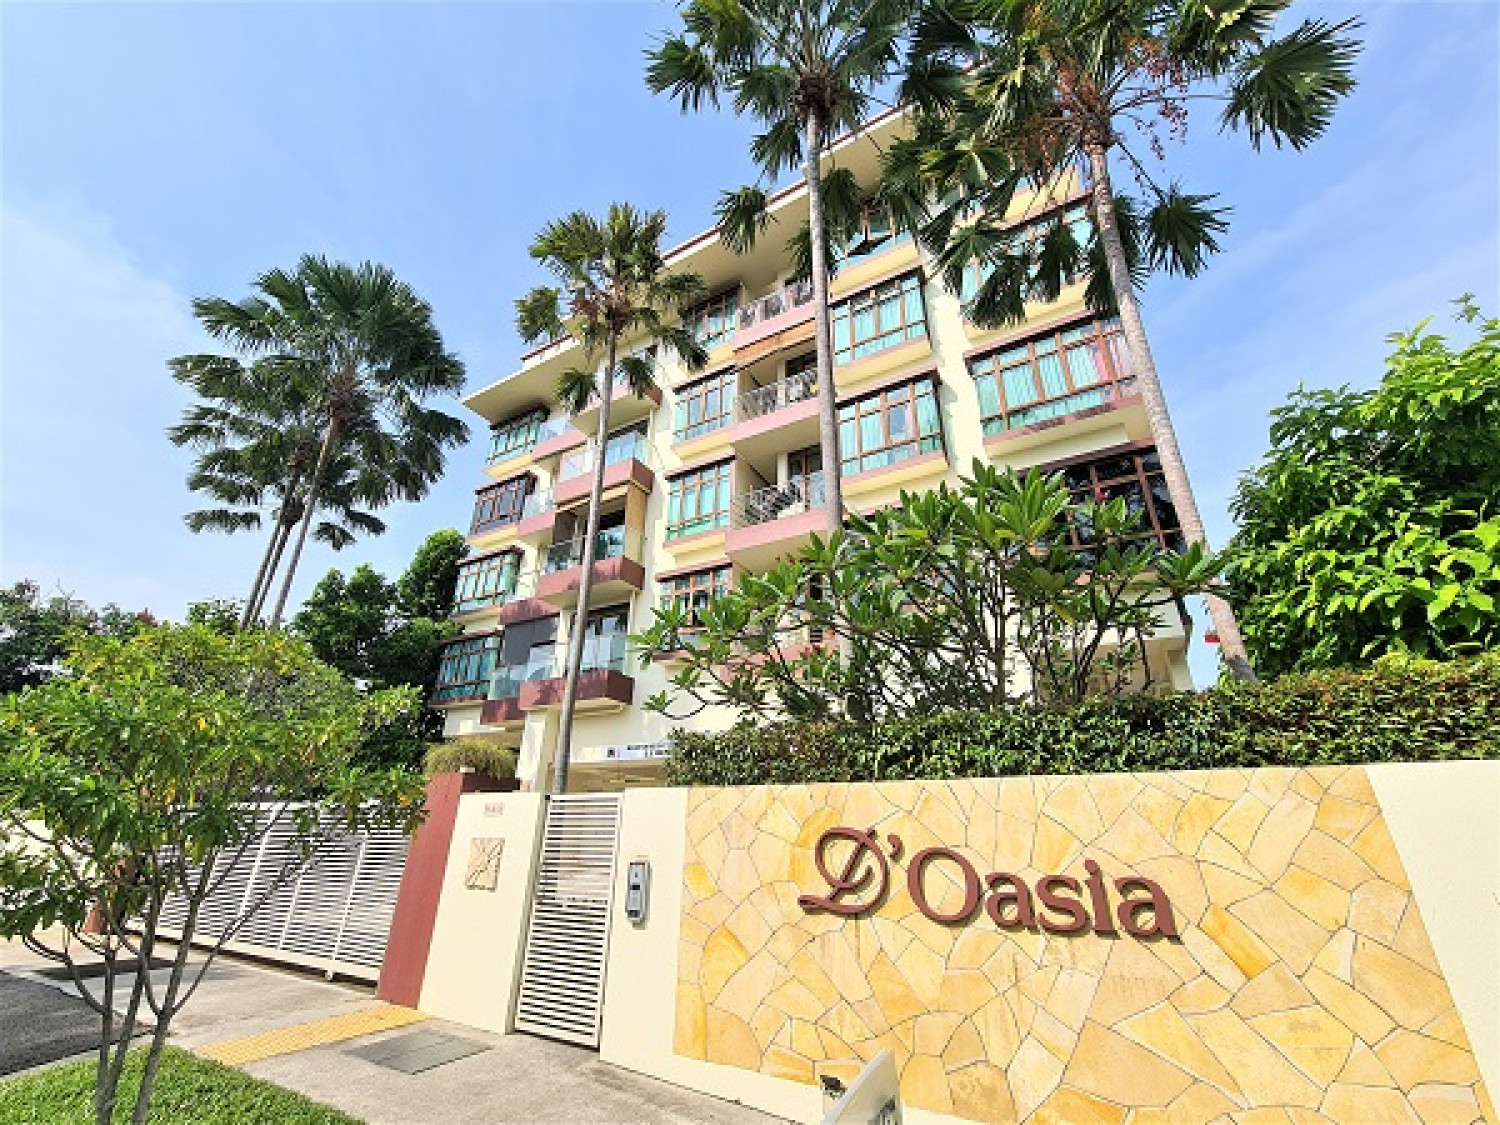 Unit at D’Oasia on the market for $790,000 - Property News